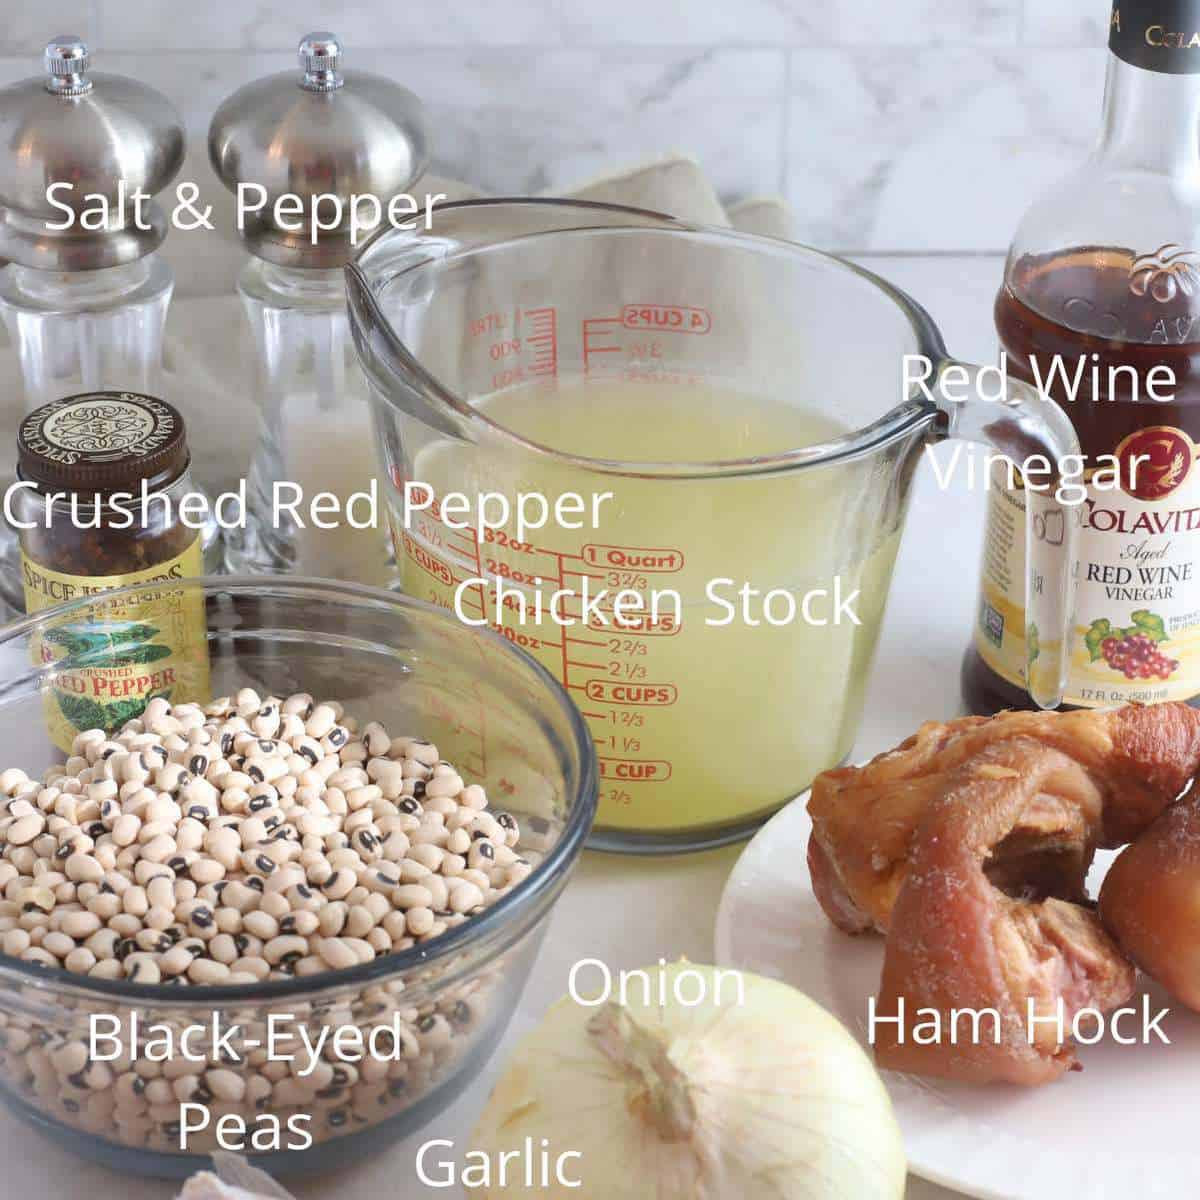 Ingredients to make Hoppin' John including dried black-eyed peas and chicken stock. 